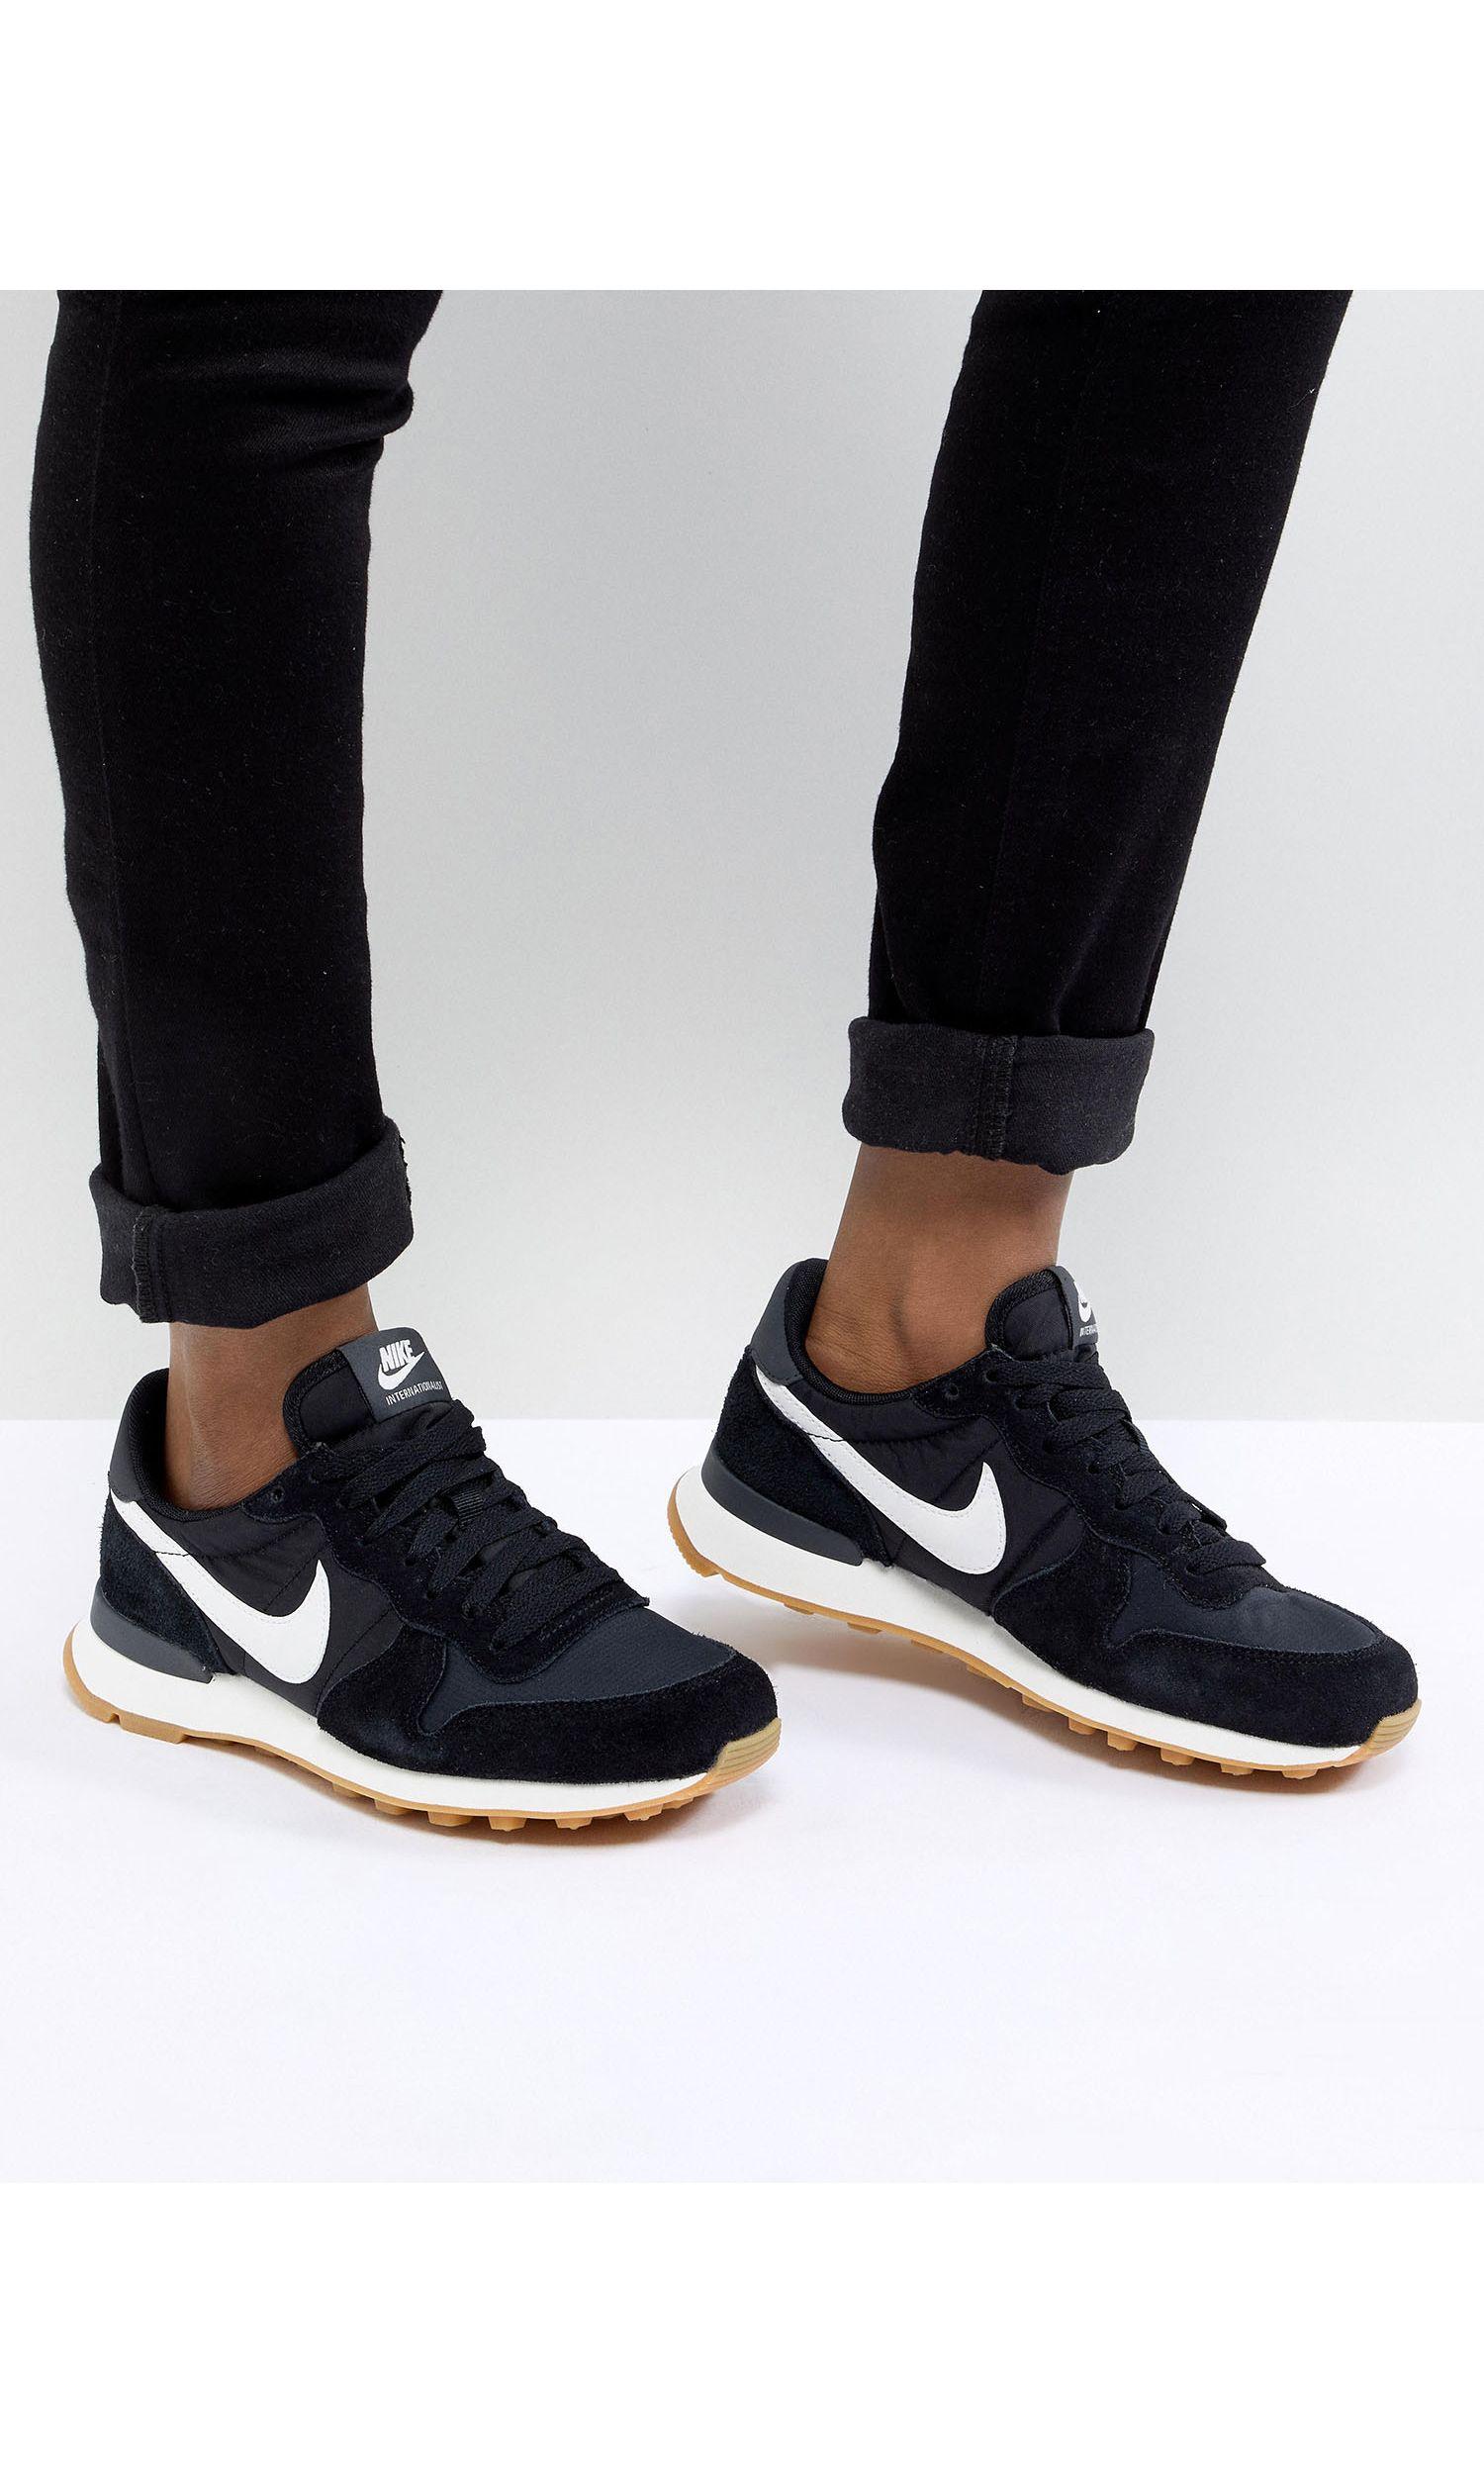 Nike Internationalist Competition Running Shoes |